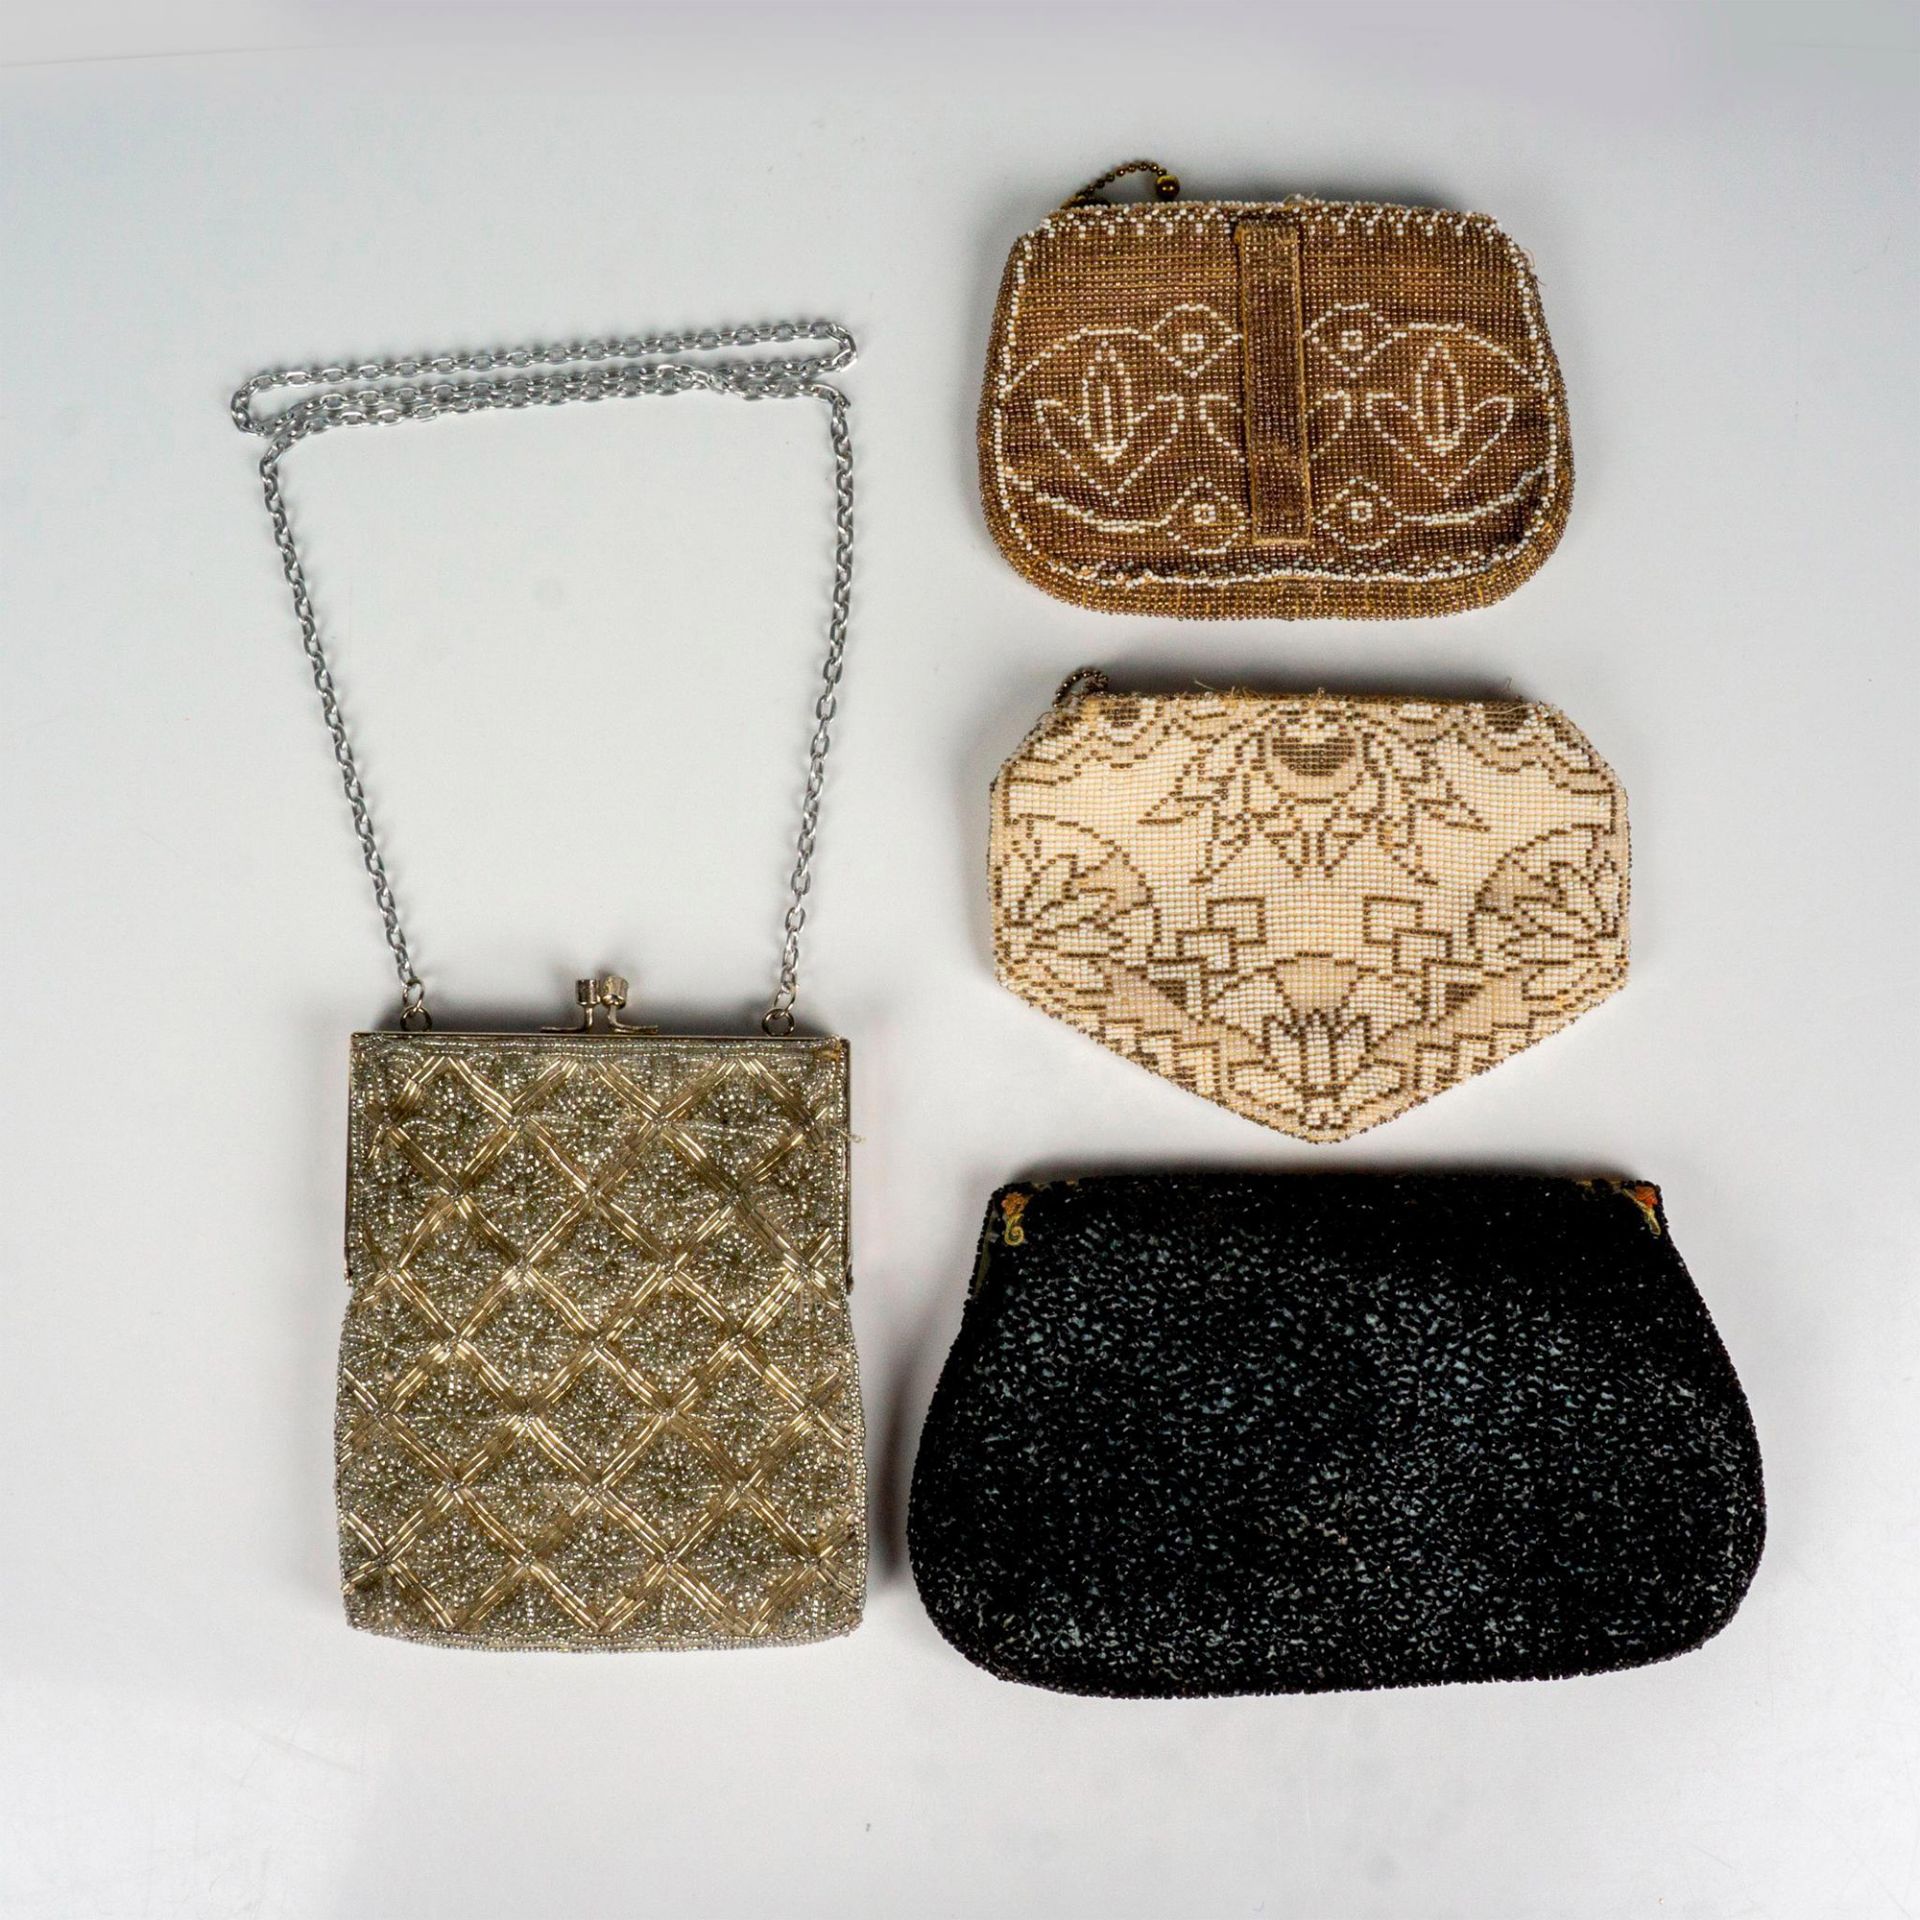 4pc Vintage Assorted Beaded Evening Purse + Clutches - Image 2 of 2